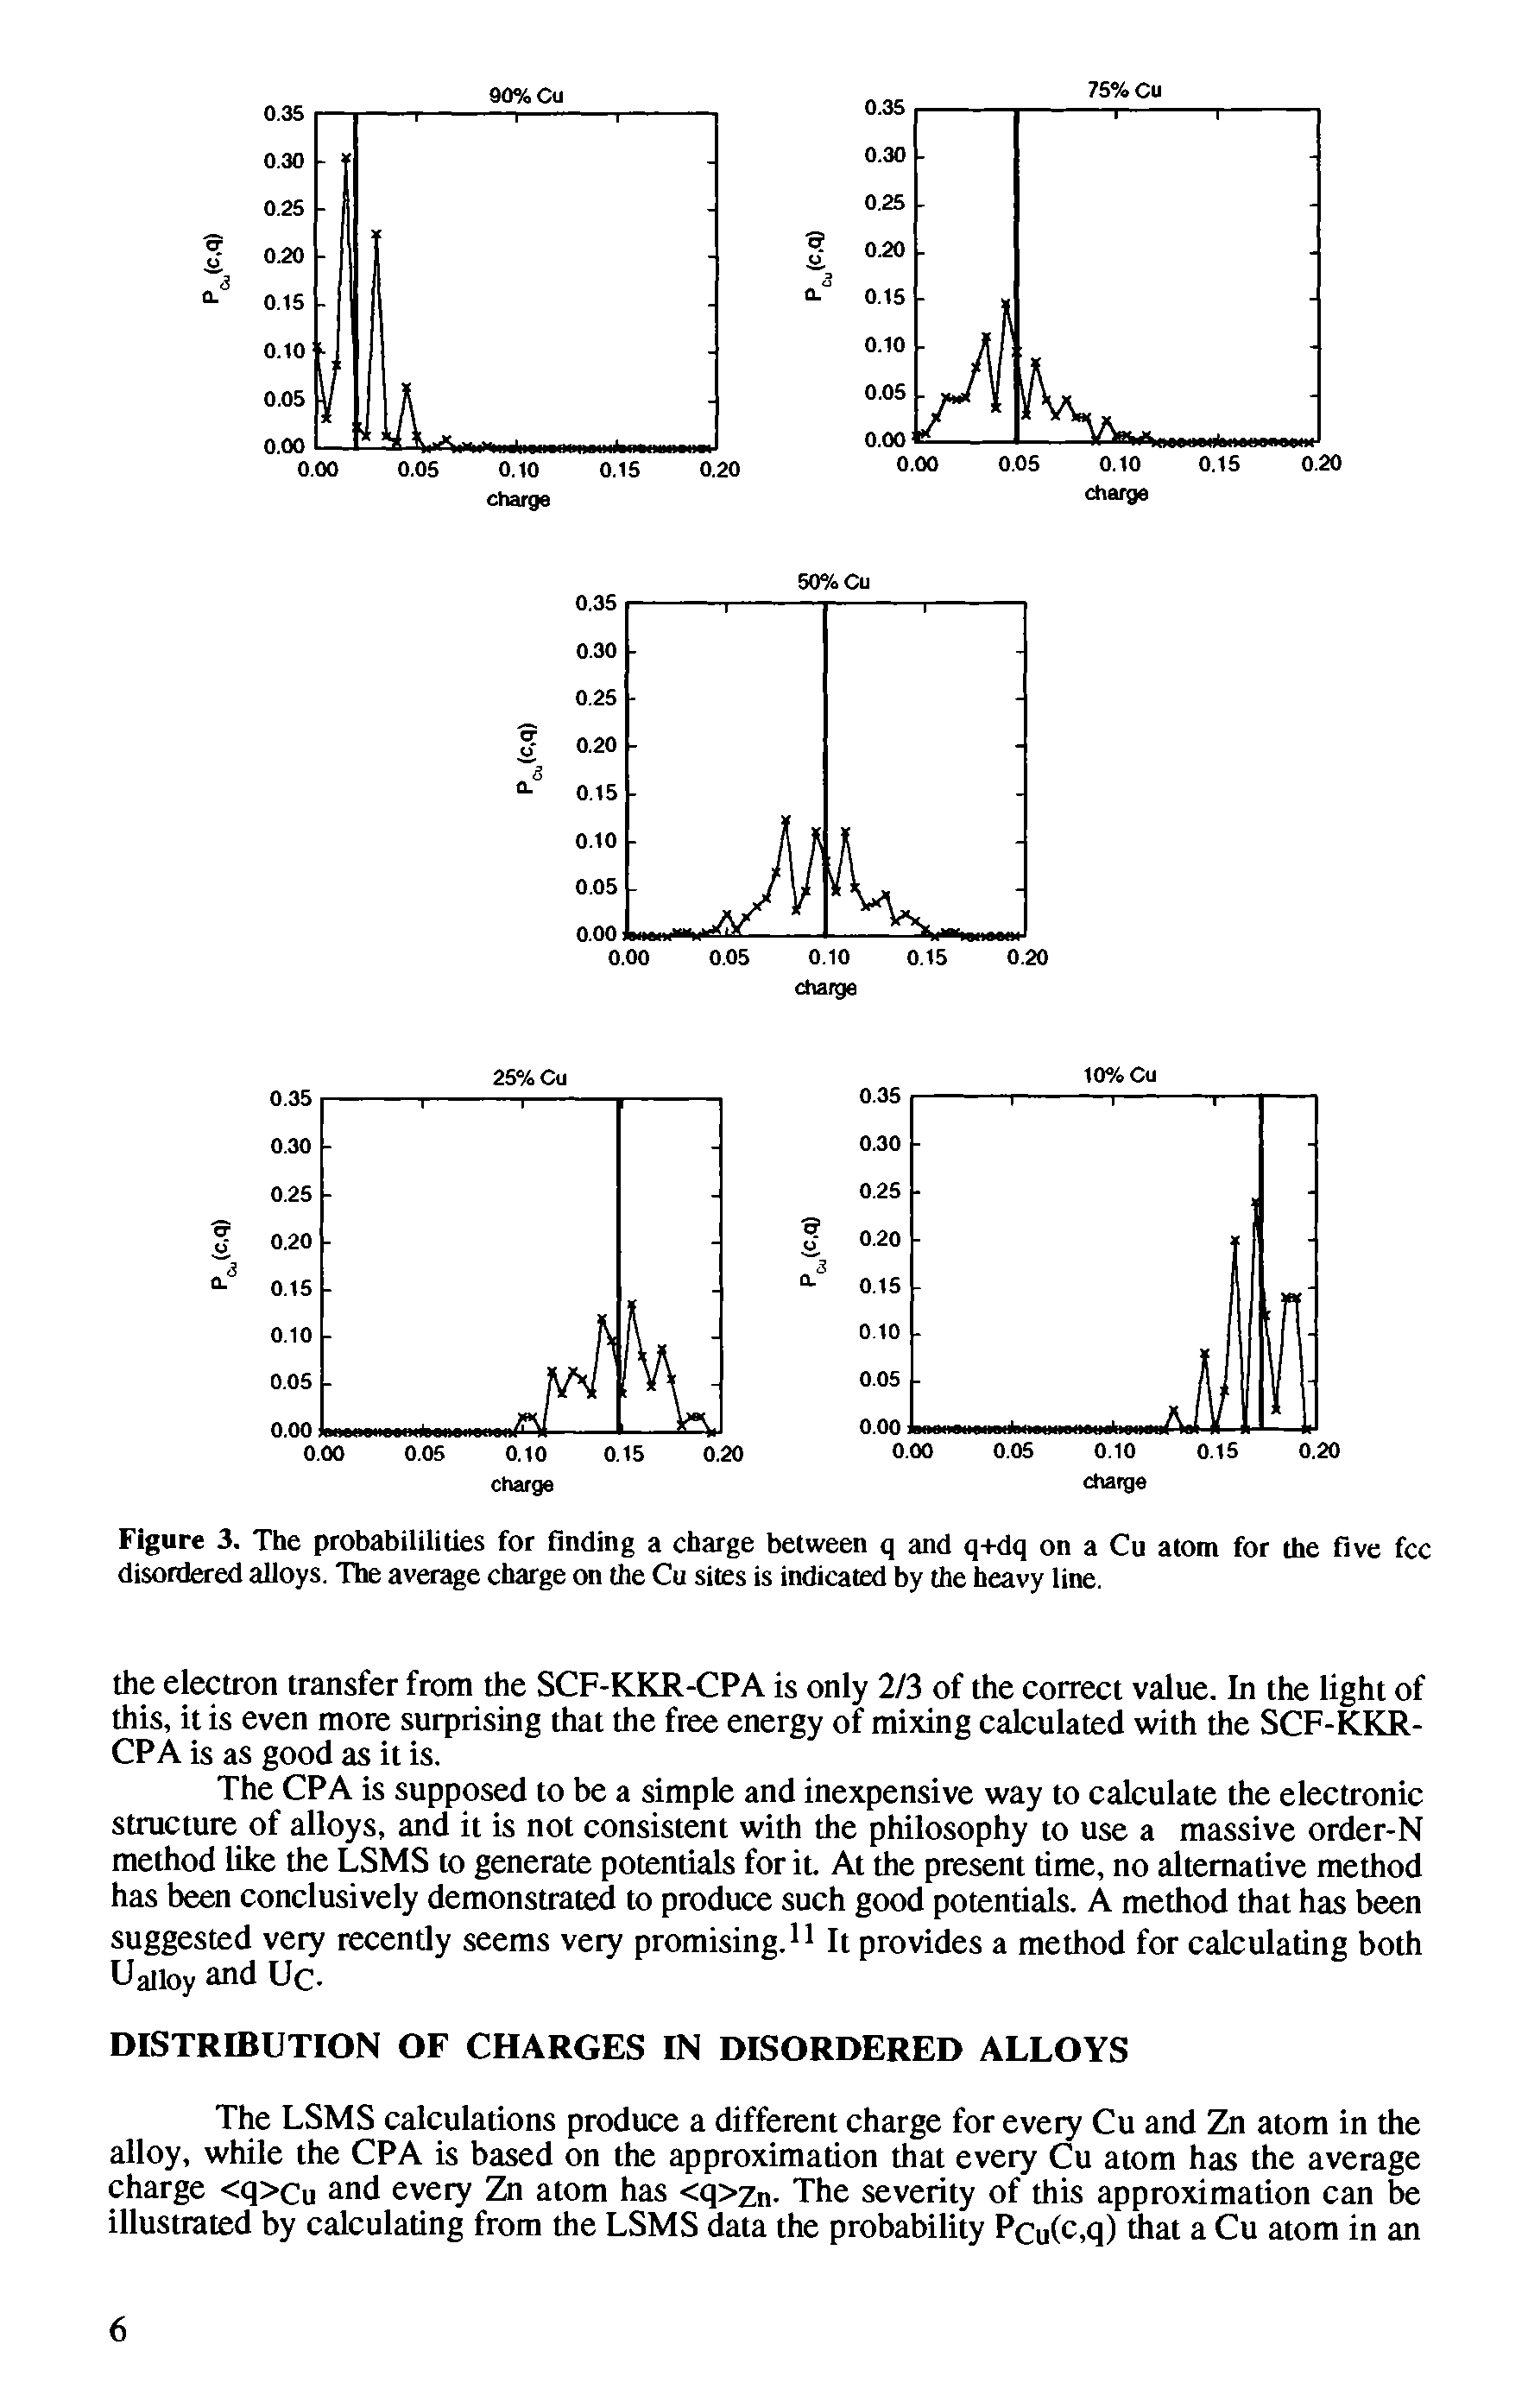 Figure 3. The probabililities for finding a charge between q and q+dq on a Cu atom for the five fee disordered alloys. The average charge on the Cu sites is indicated by the heavy line.